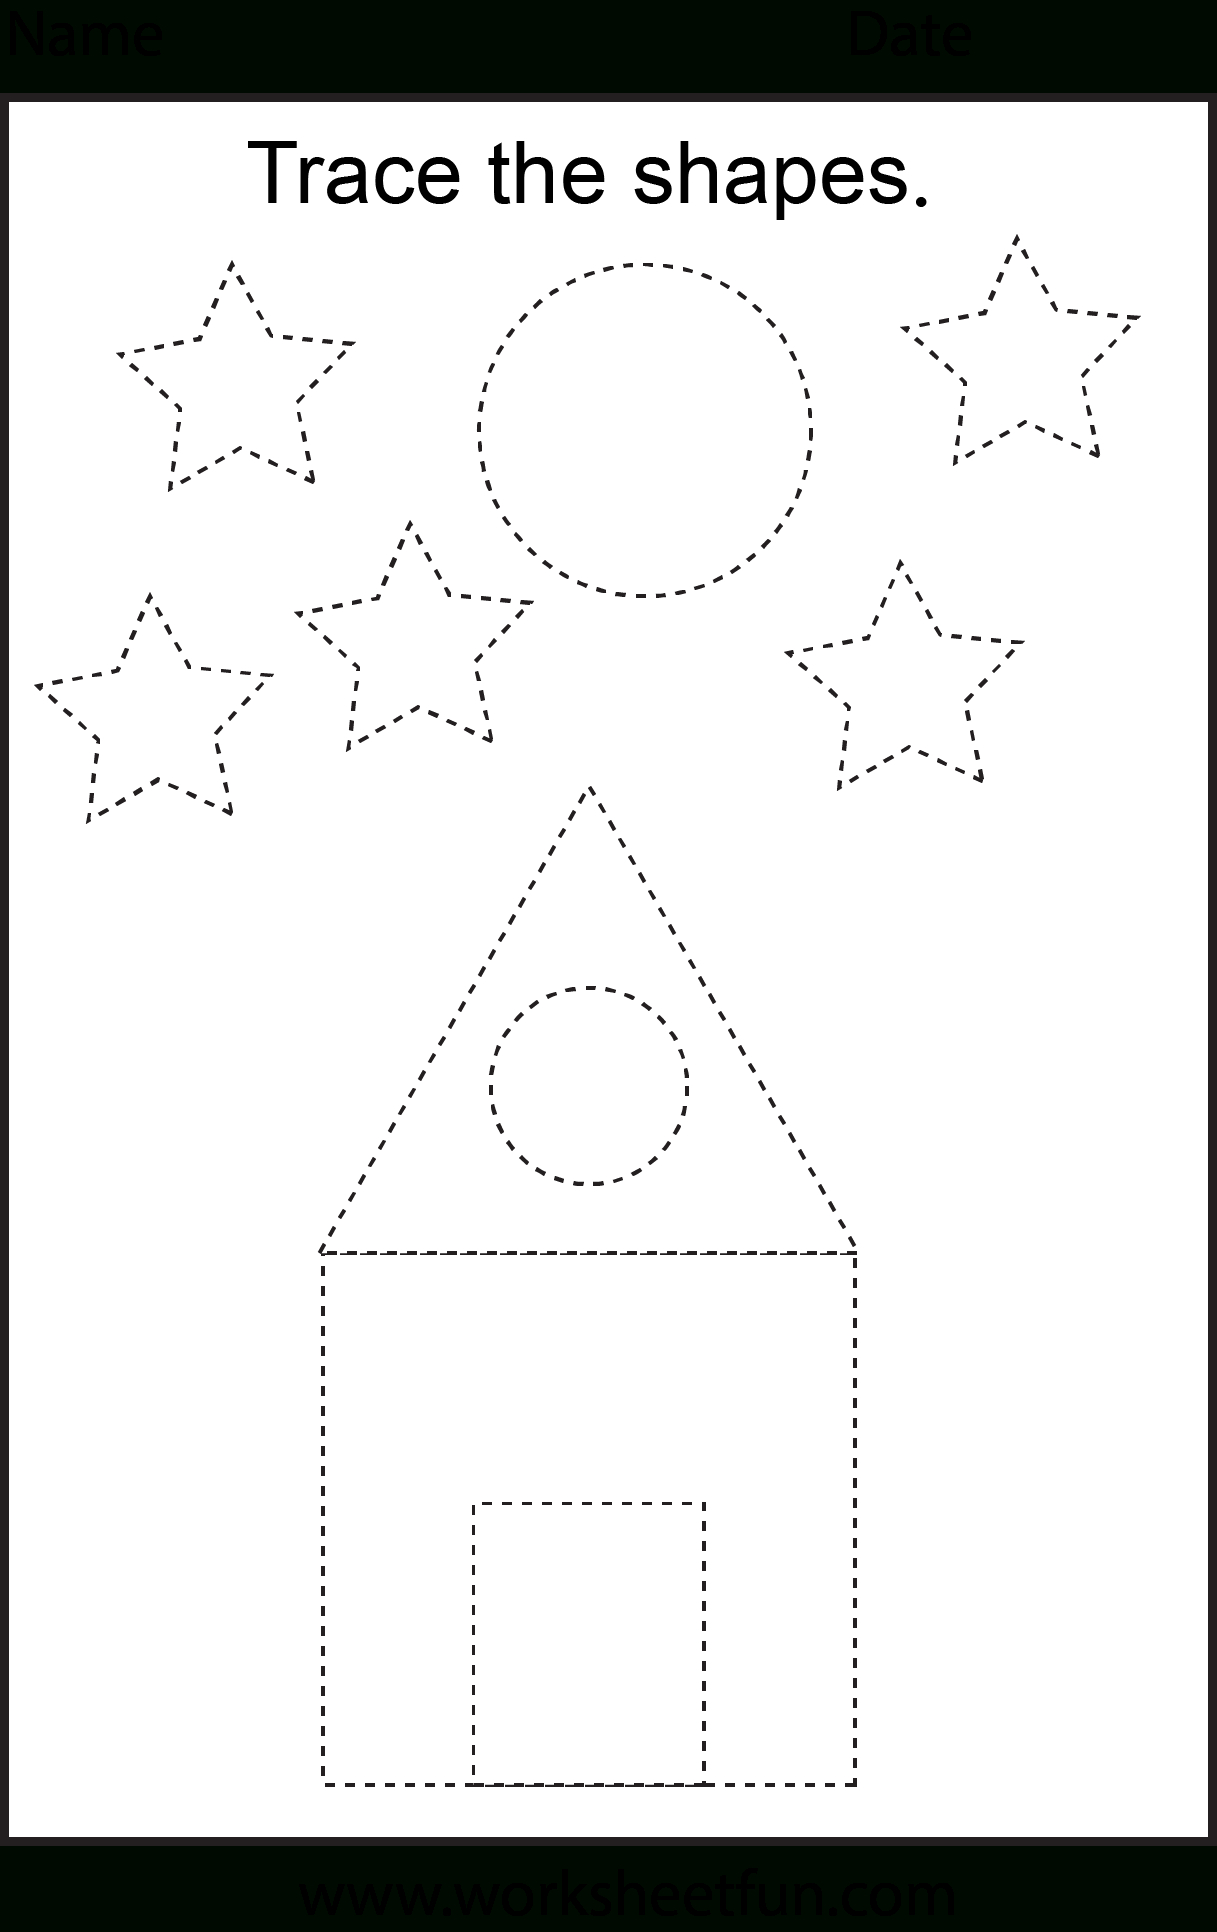 Free Printable Preschool Worksheets - This One Is Trace The Shapes - Free Printable Hoy Sheets